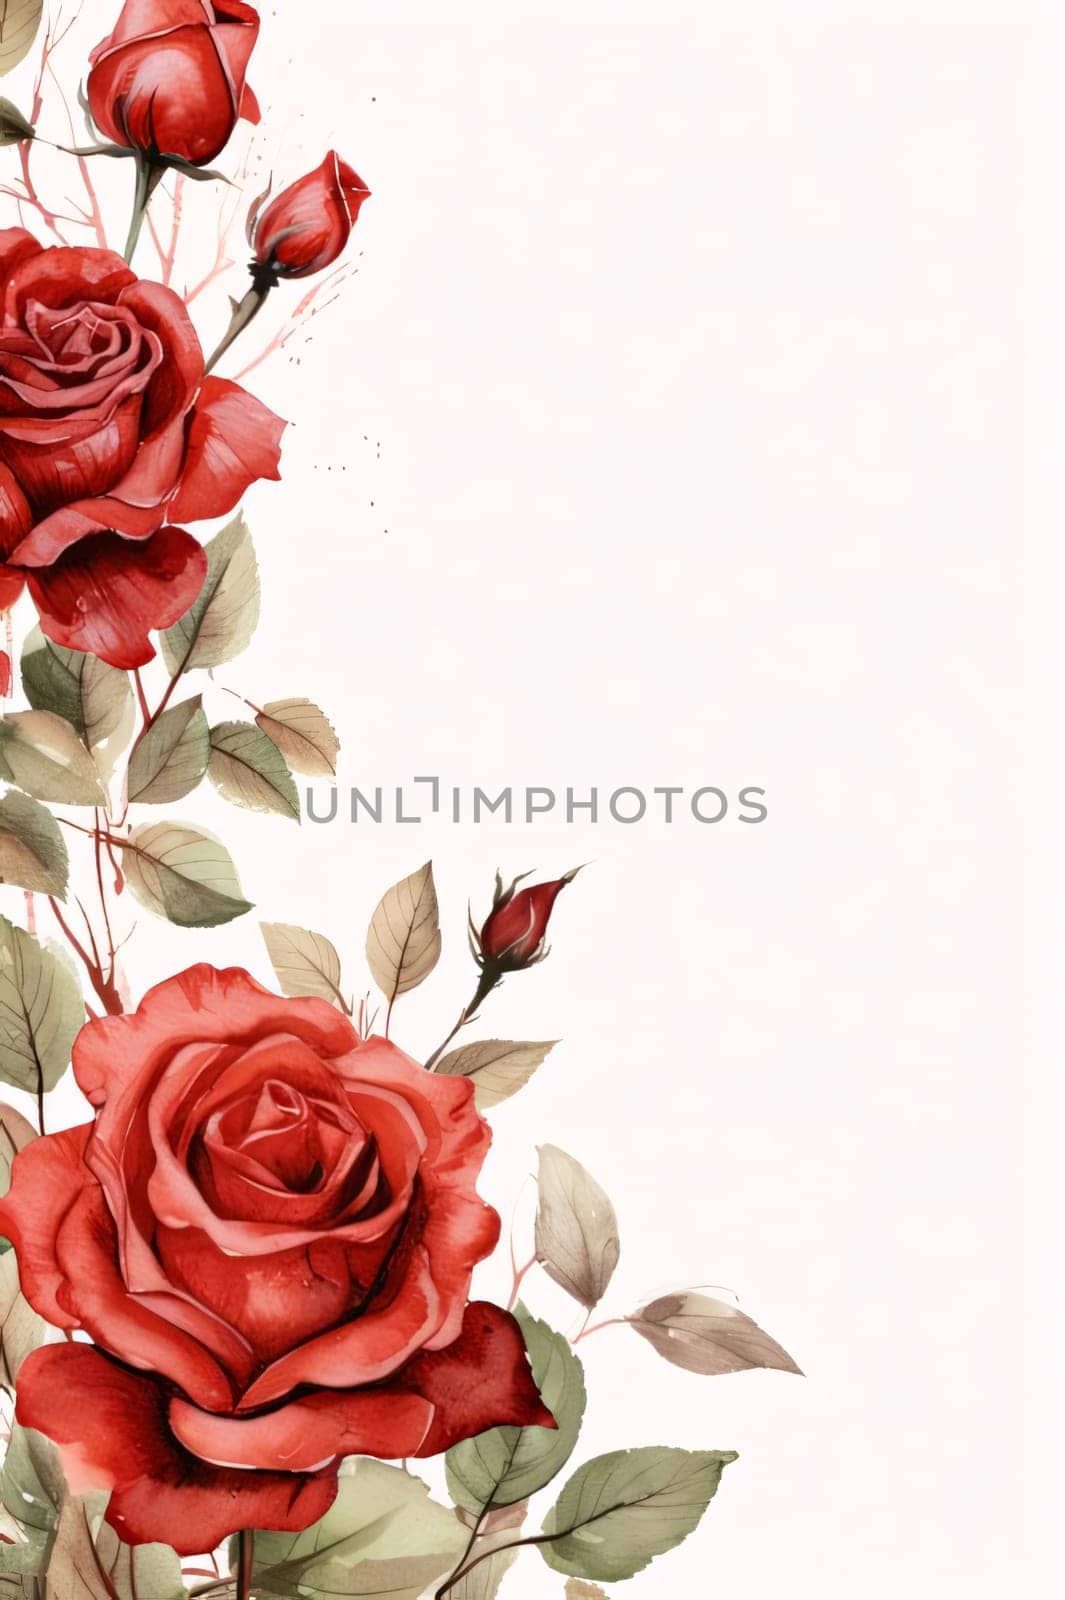 Had a blank card decorated with red roses with leaves.Valentine's Day banner with space for your own content. by ThemesS